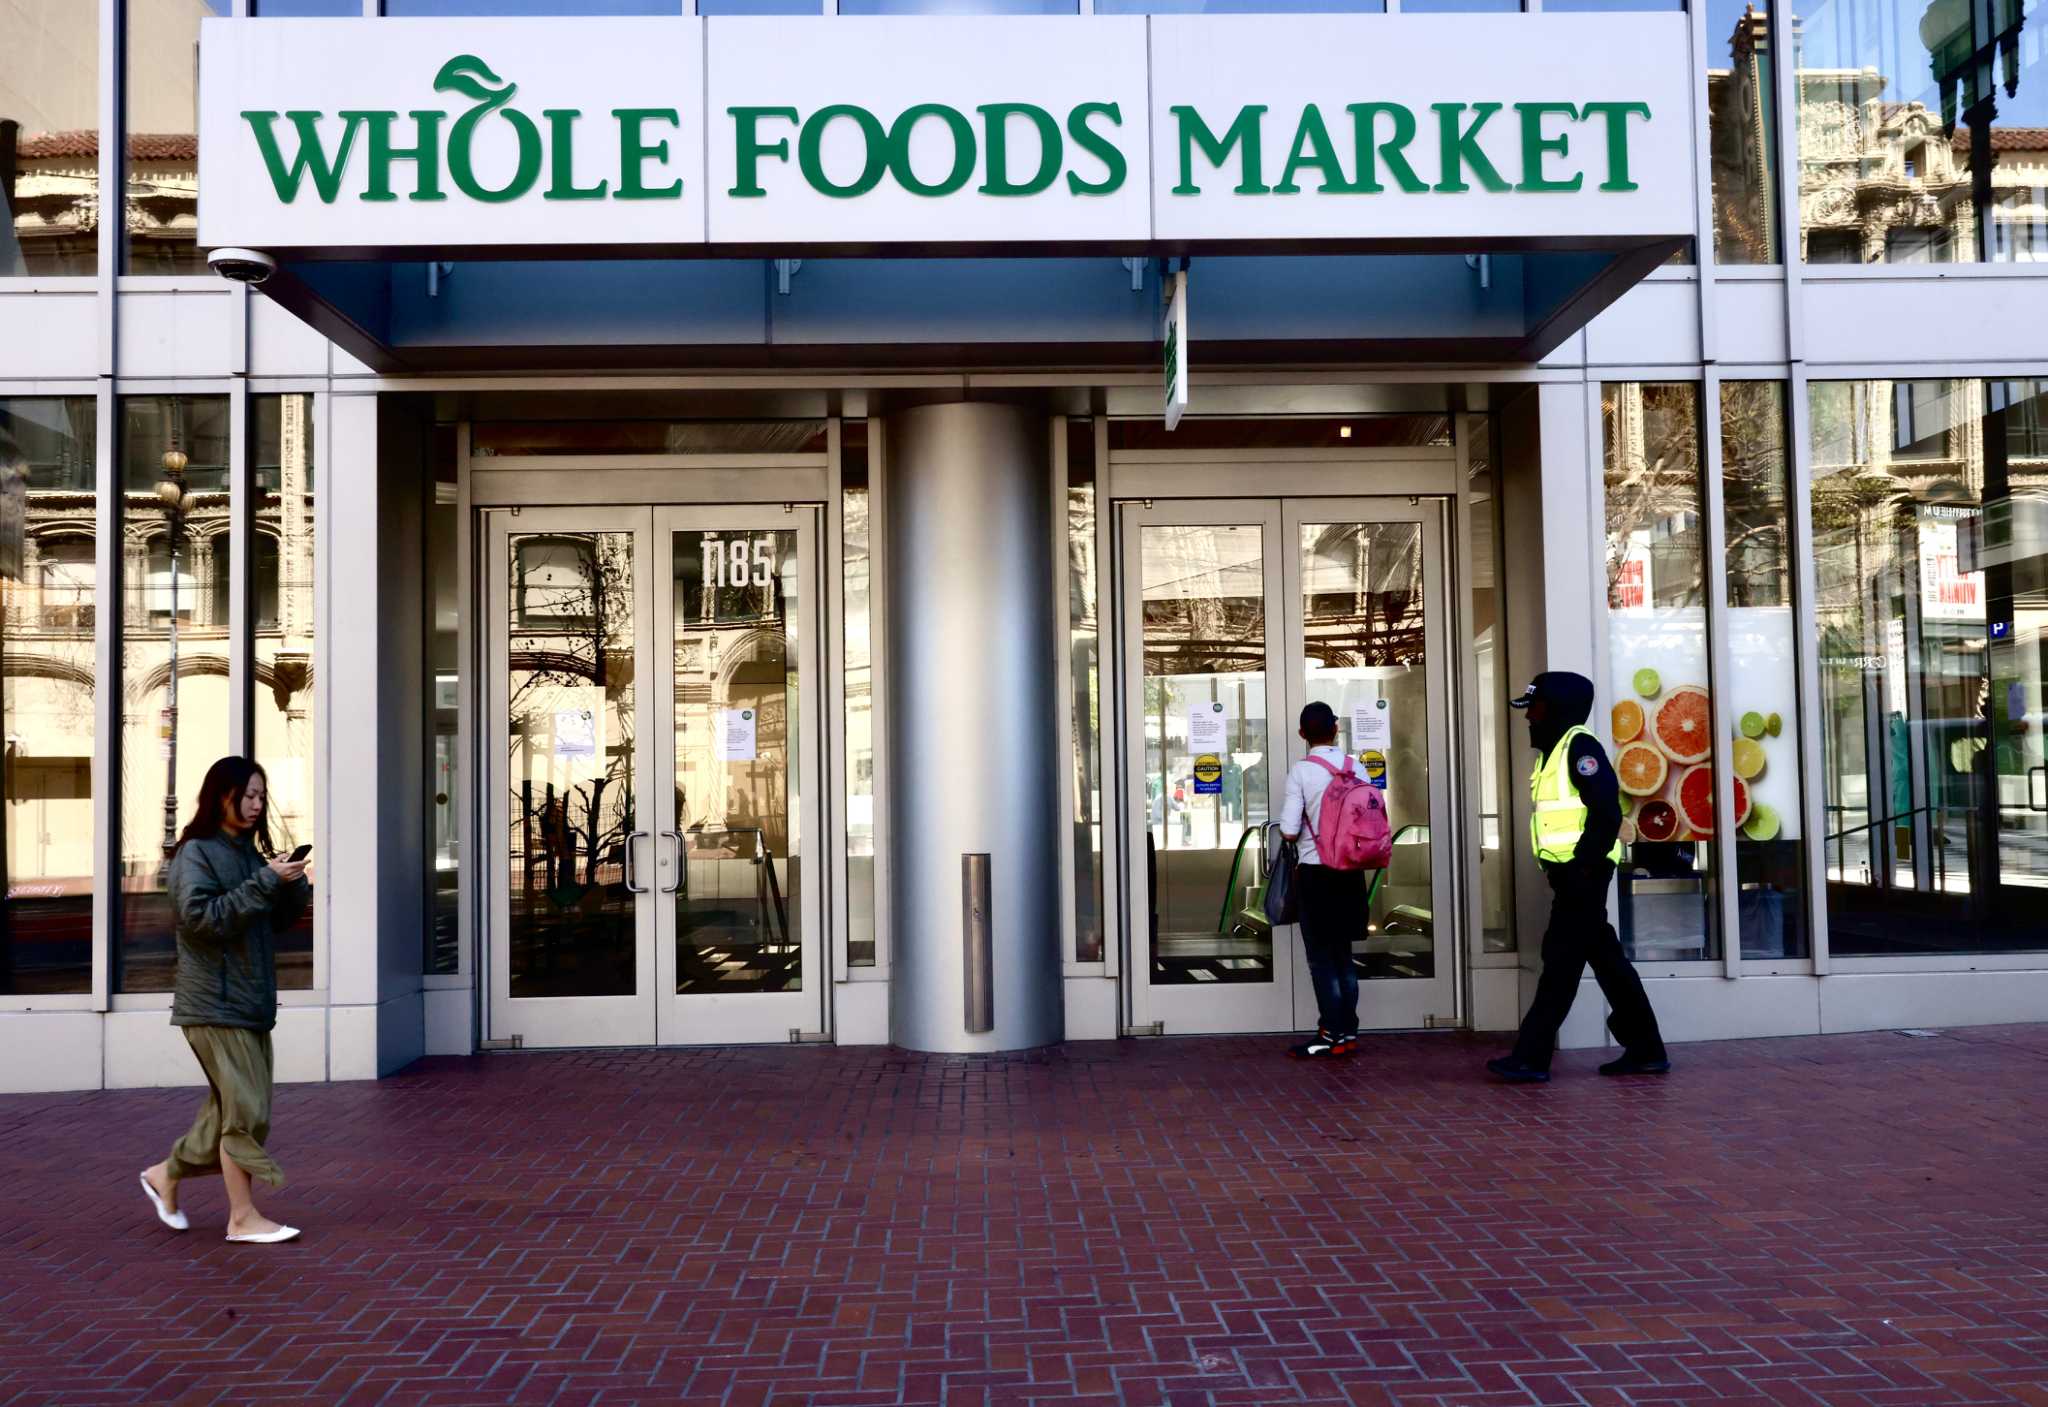 Months before Whole Foods closed S.F store, man died there of overdose